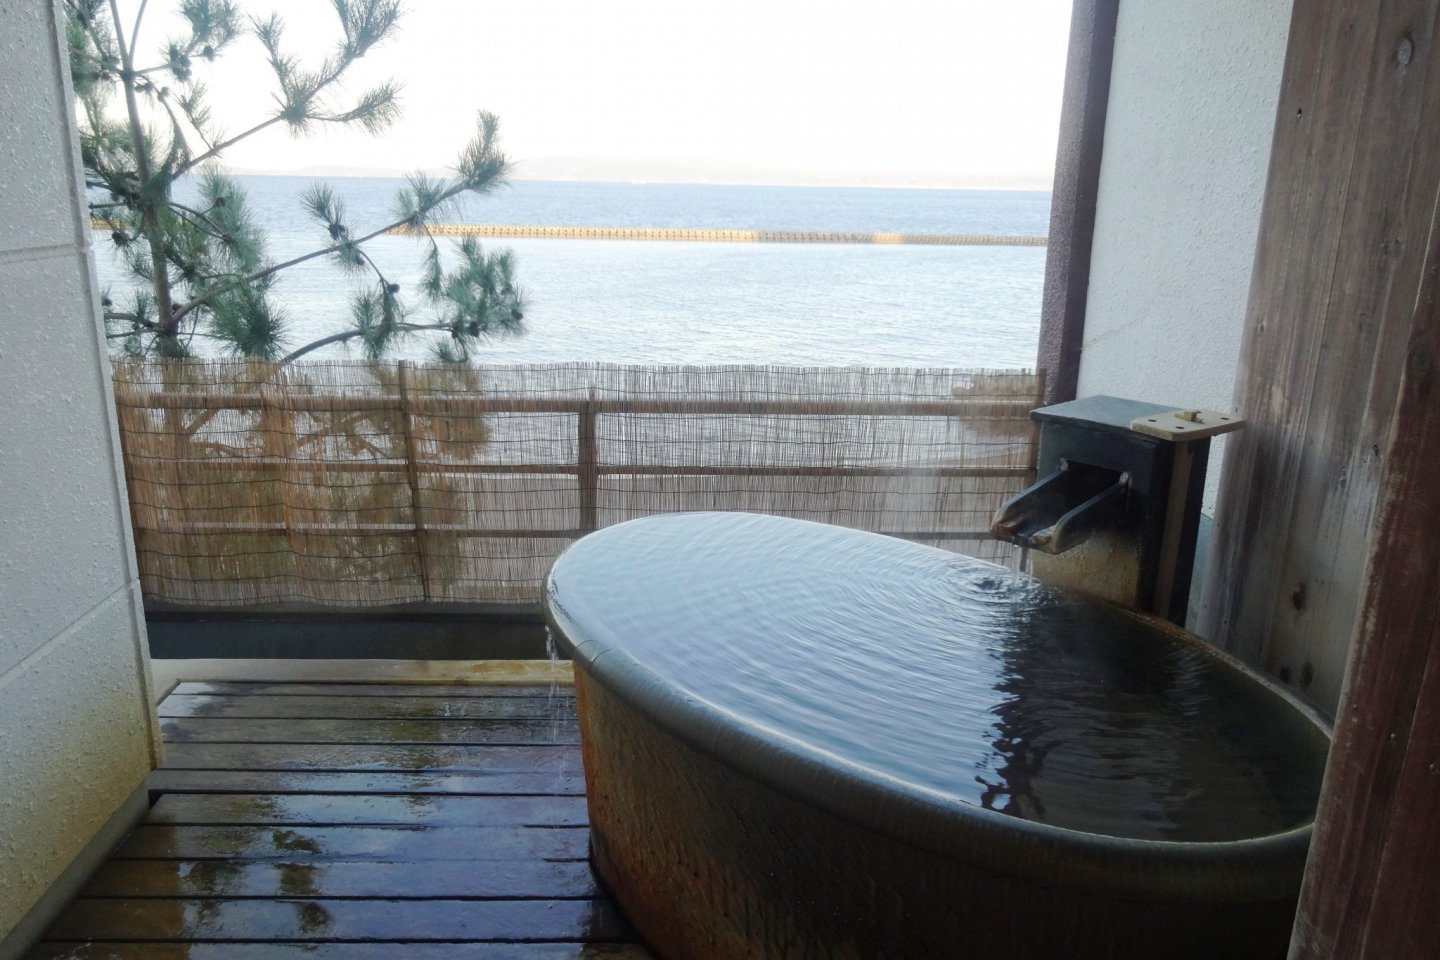 Tub with a view at the Ryokan Ginsyo